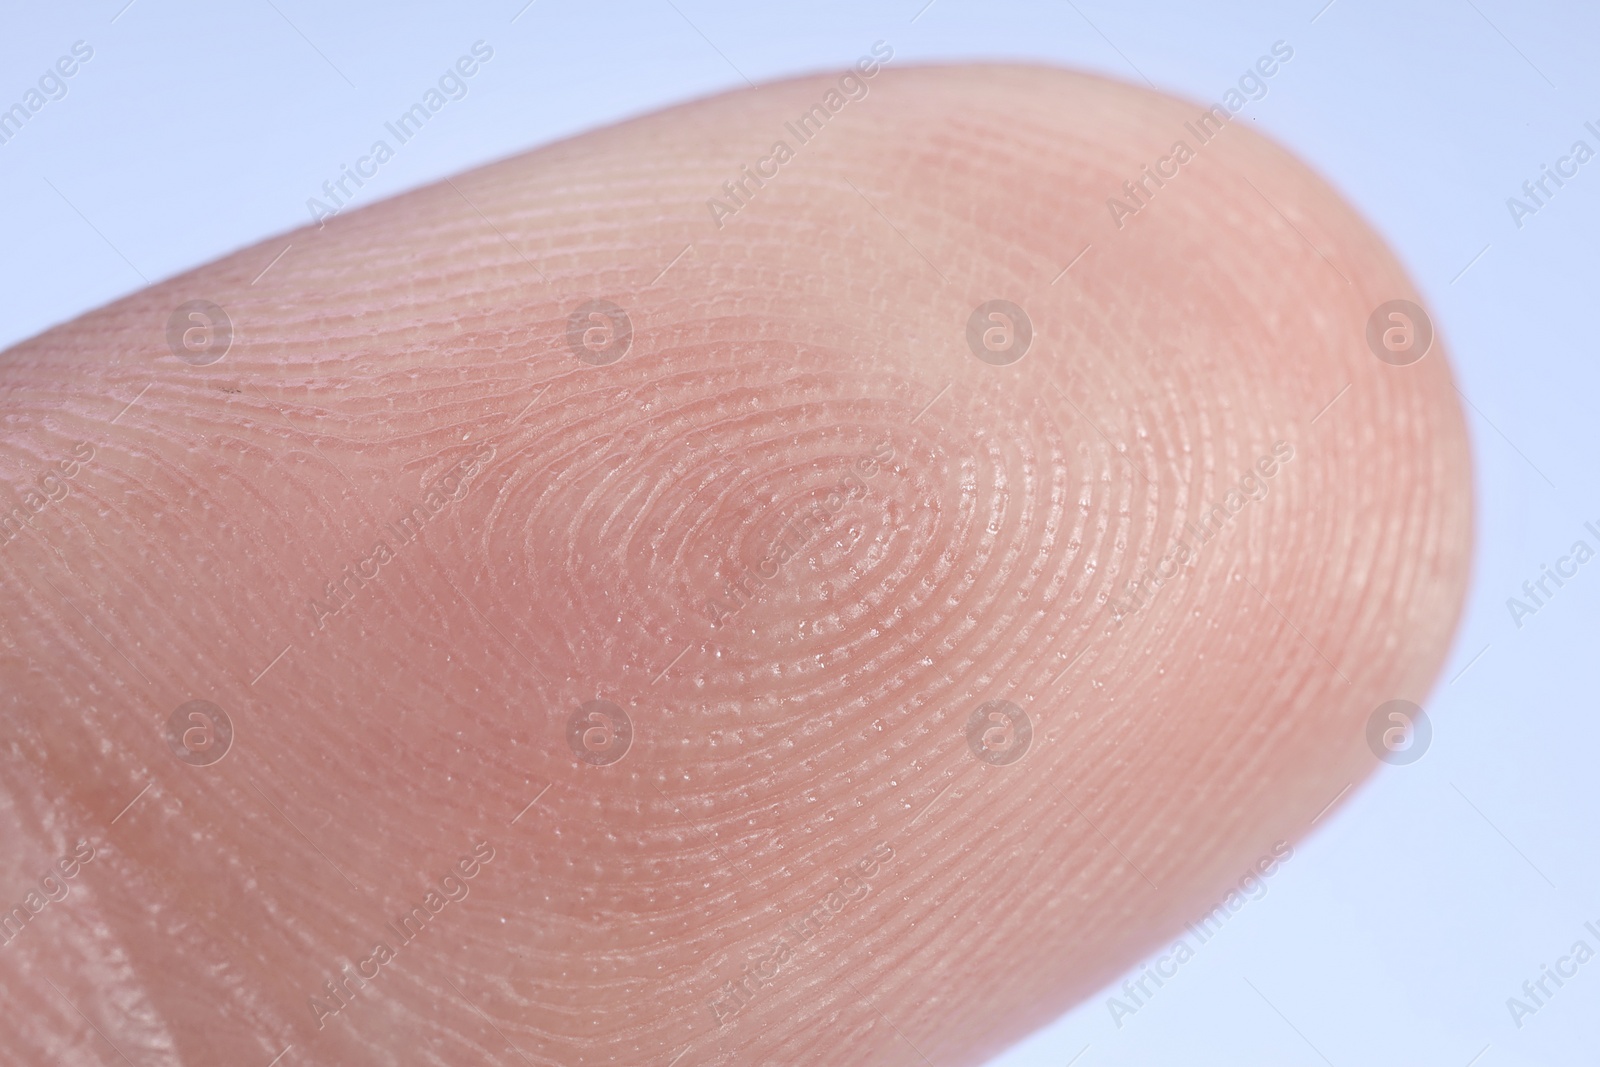 Photo of Finger with friction ridges on light blue background, macro view